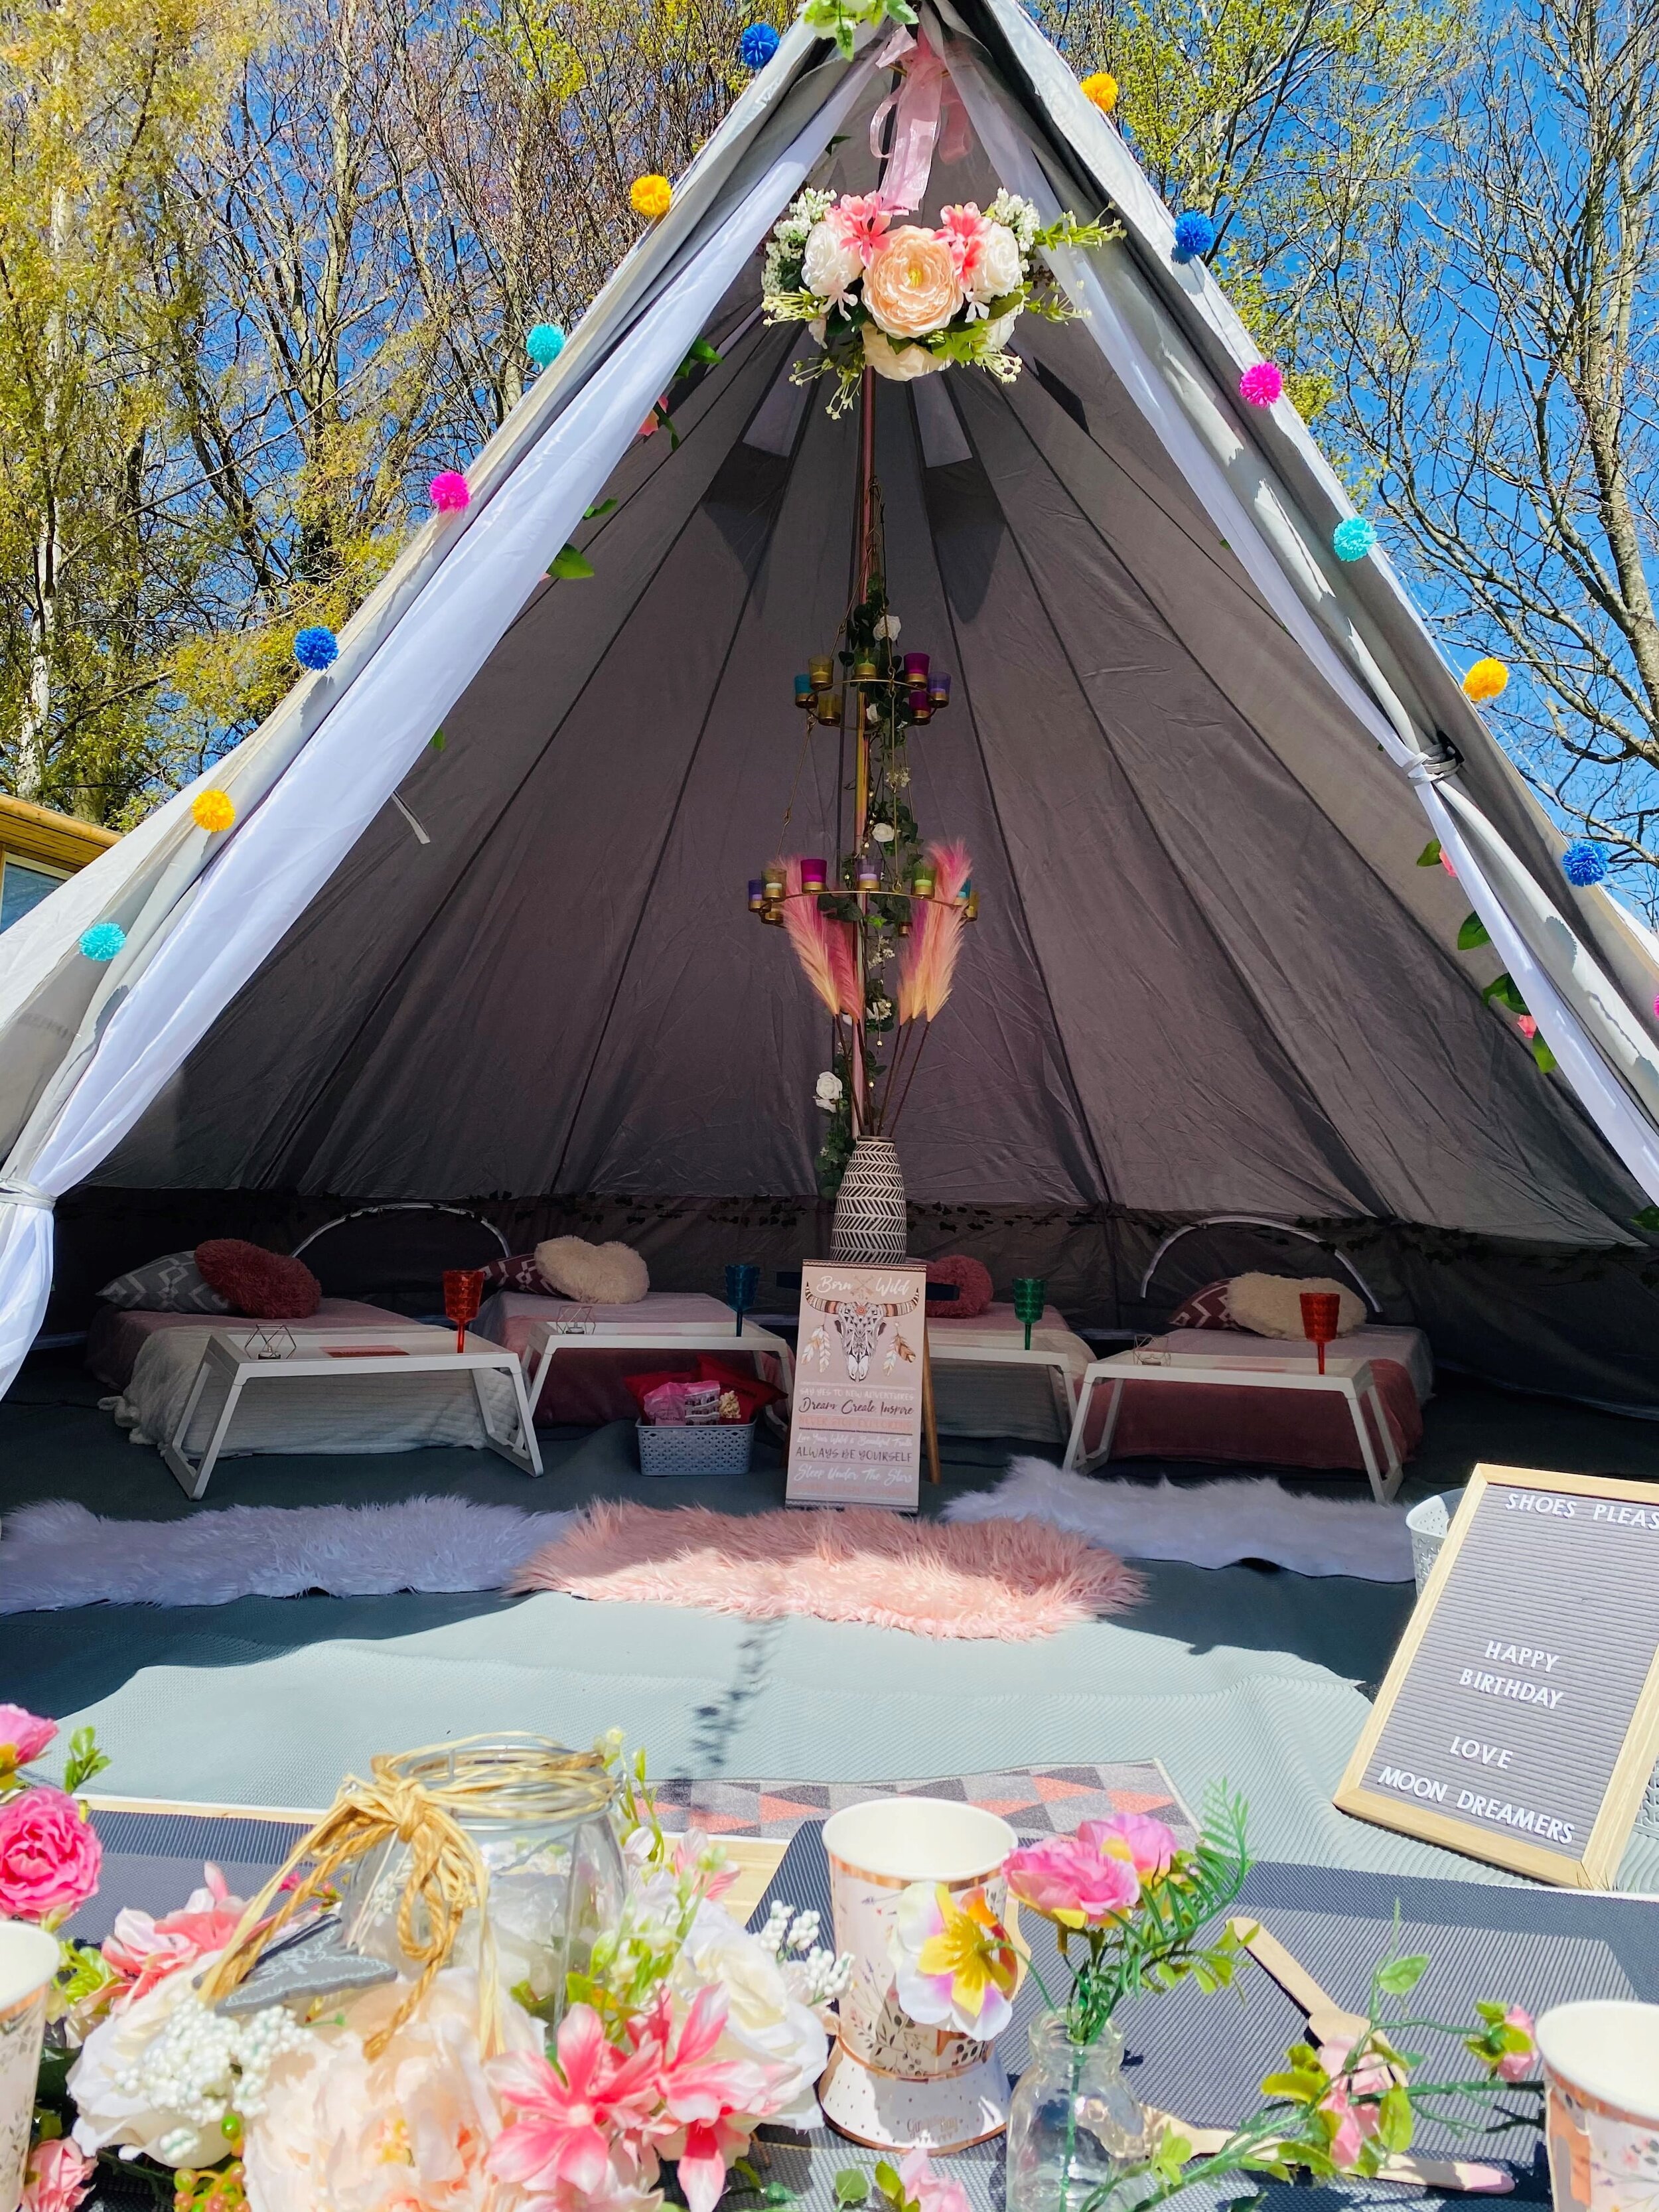 Moon Dreamers Teepee - Sleepover Party Tents in Kent